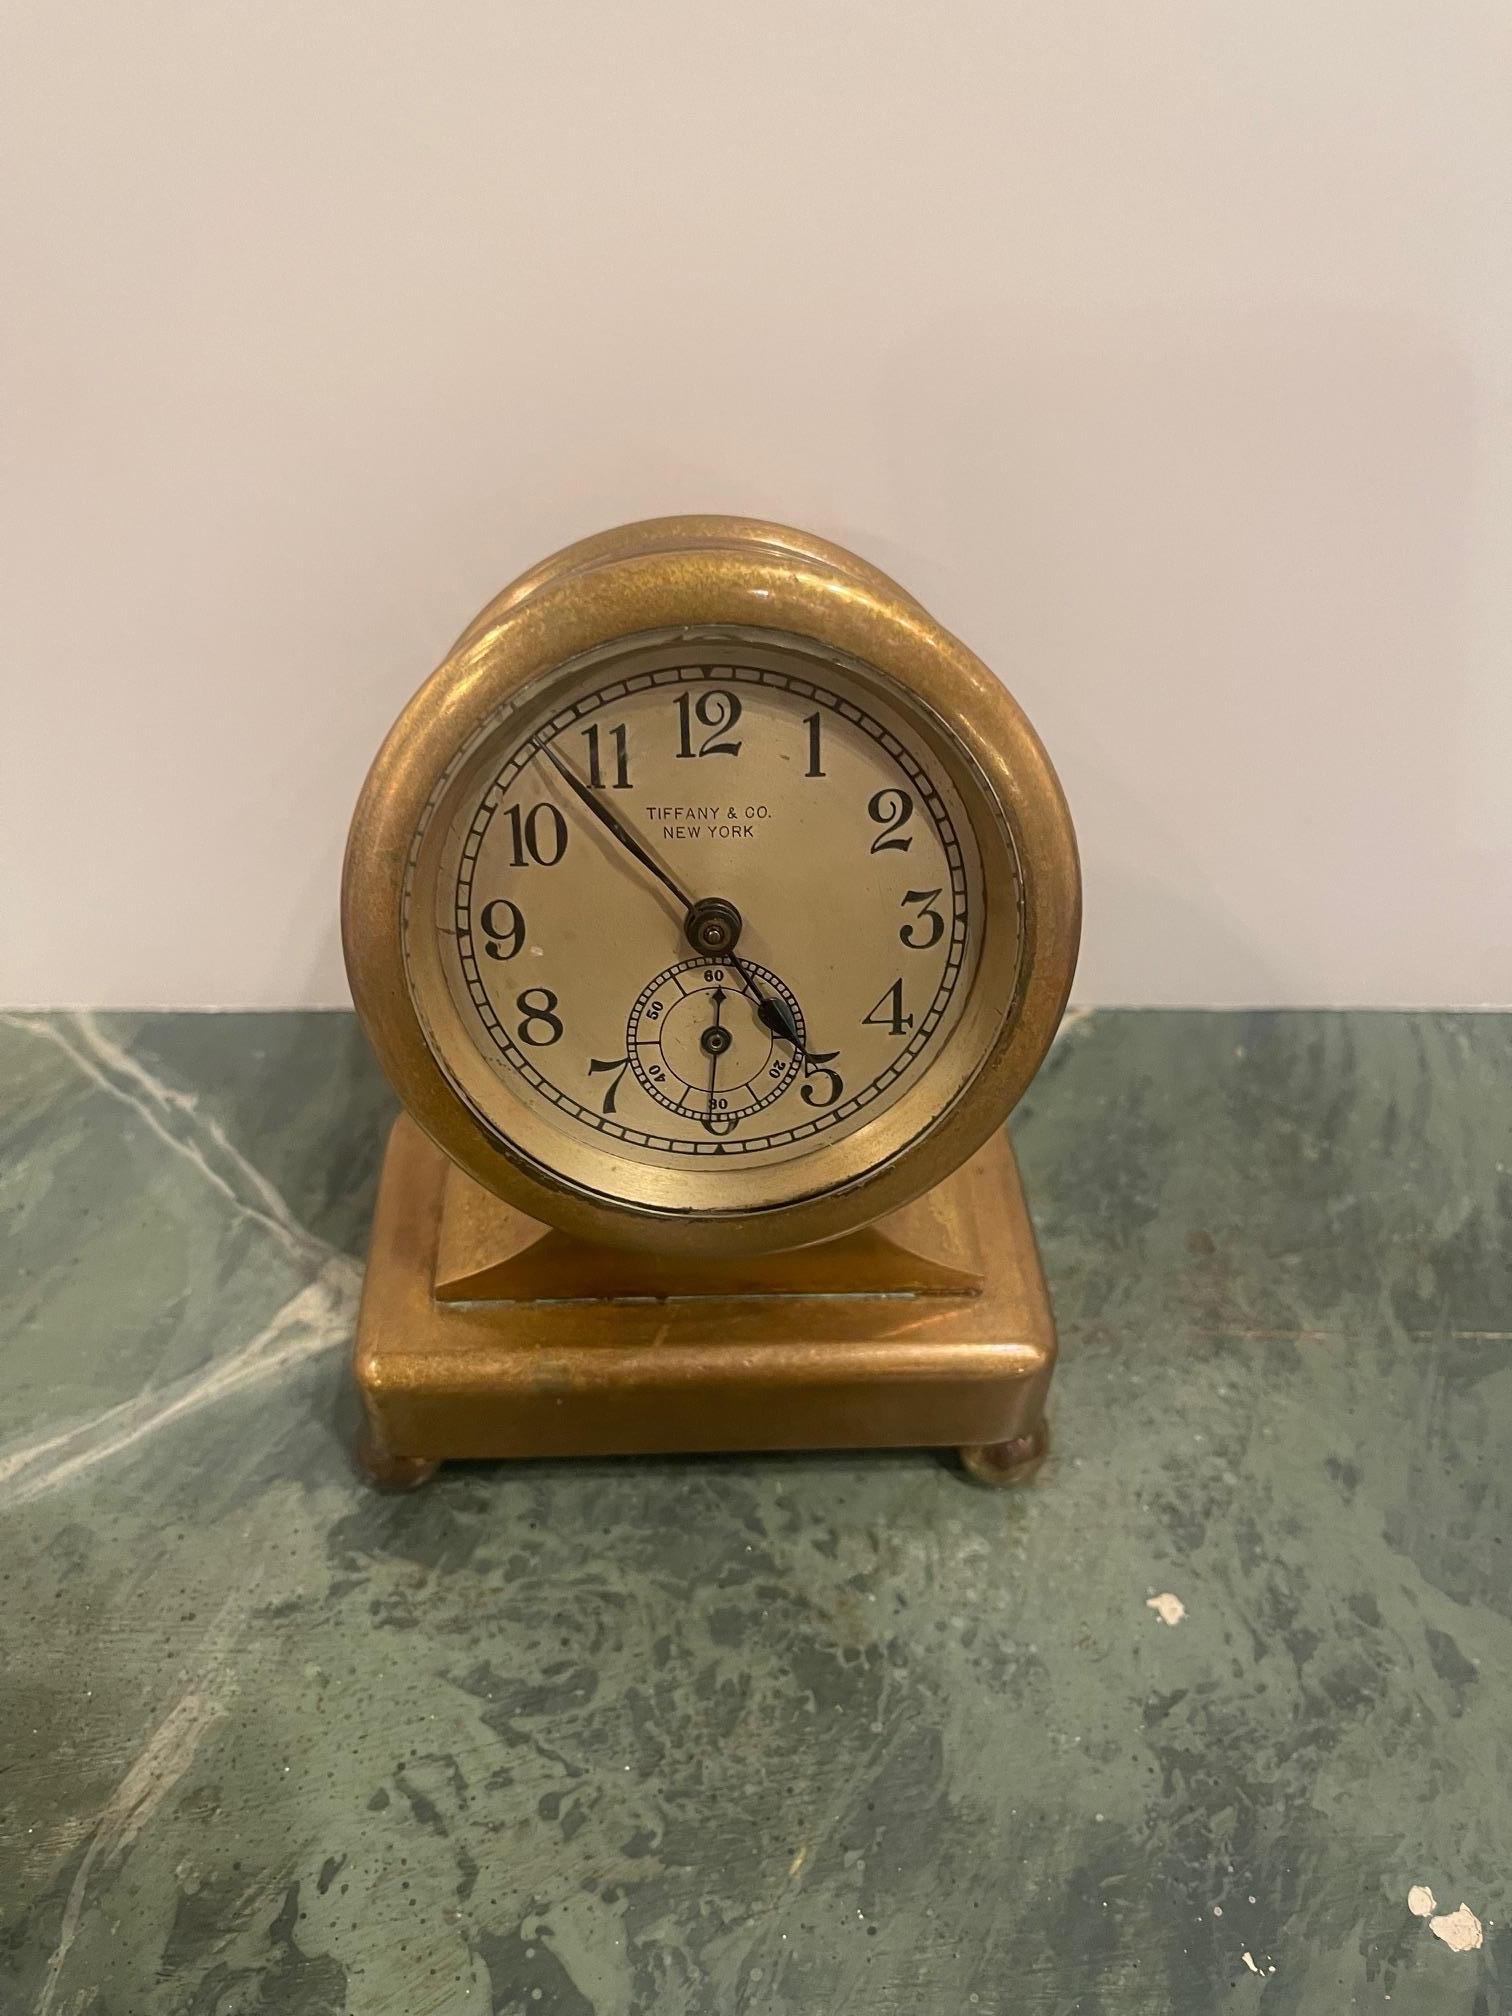 Tiffany & Co. bronze desk clock, early 20th century. Heavy bronze case with metal face and engraved Arabic numerals. Marked Tiffany & co New York. Front and back unscrew. Mechanism winds and is functional. Accuracy not tested. Some patination